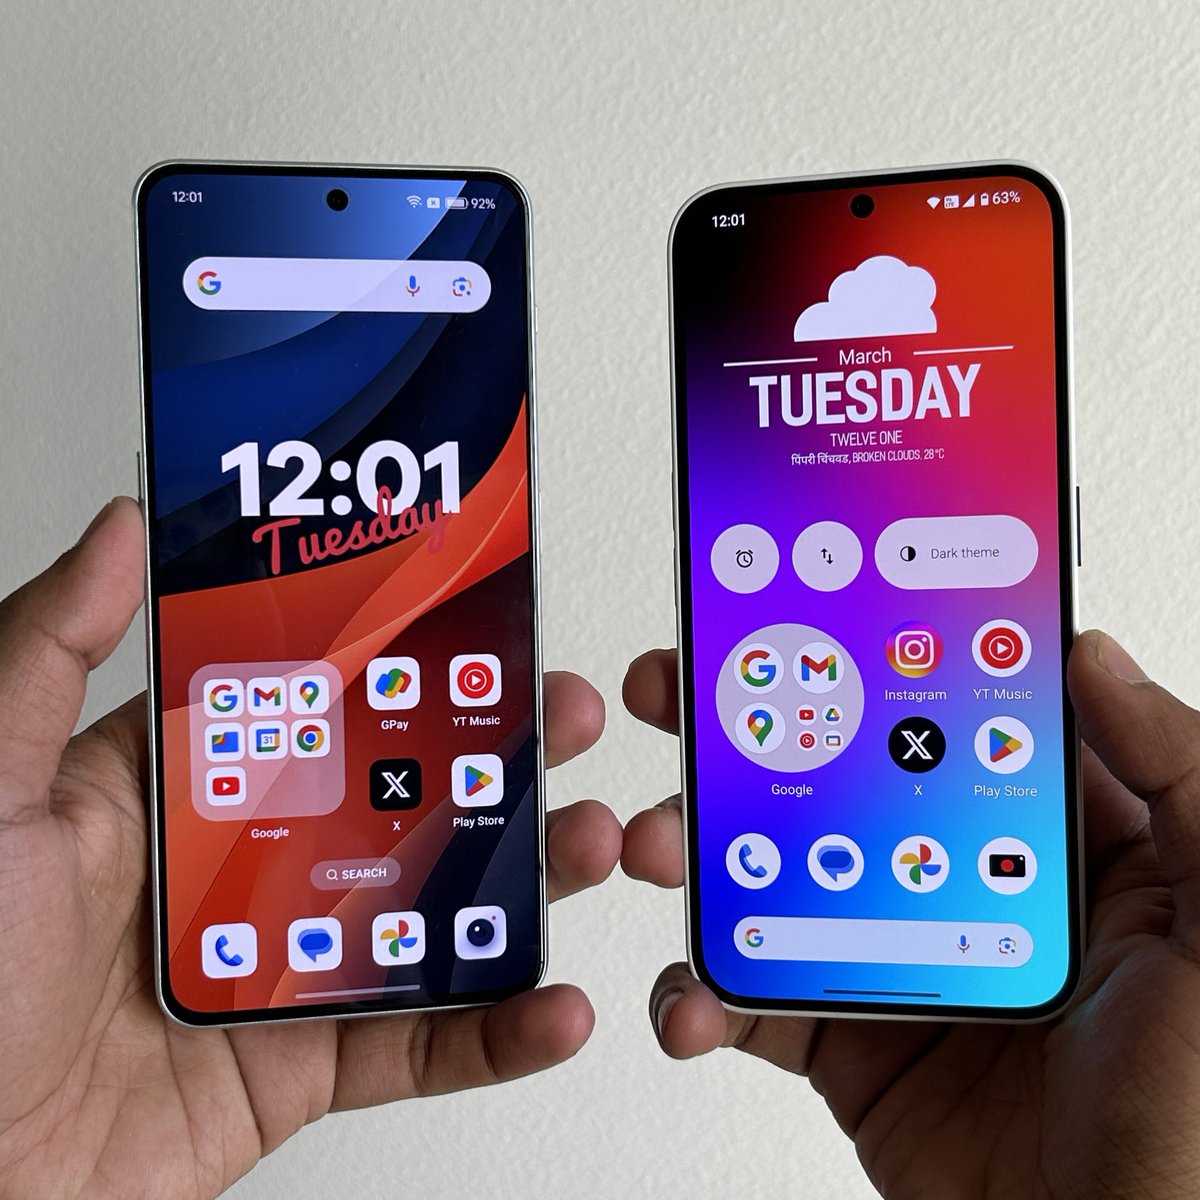 OxygenOS 14 vs Nothing OS 2.5 Which one would you choose? 👀